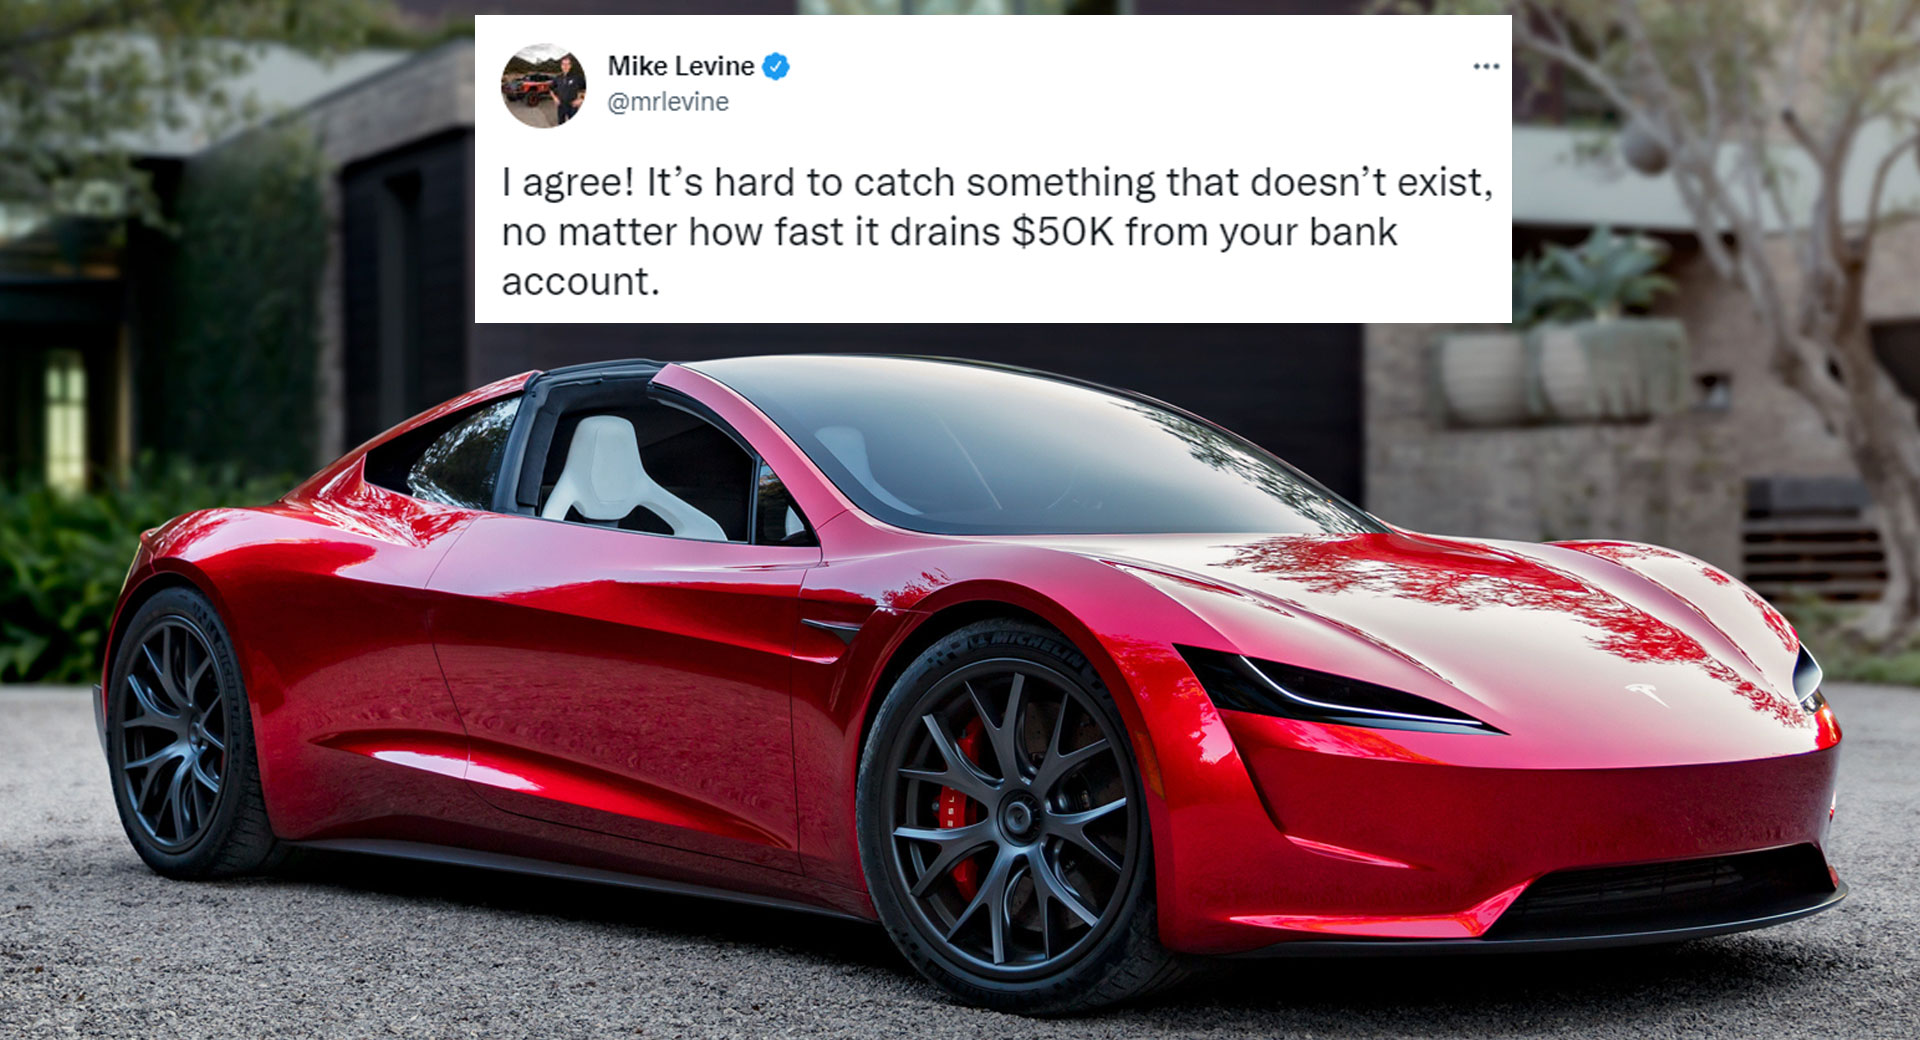 Elon Musk Says The Tesla Roadster Will “Hopefully” Hit Production In 2024